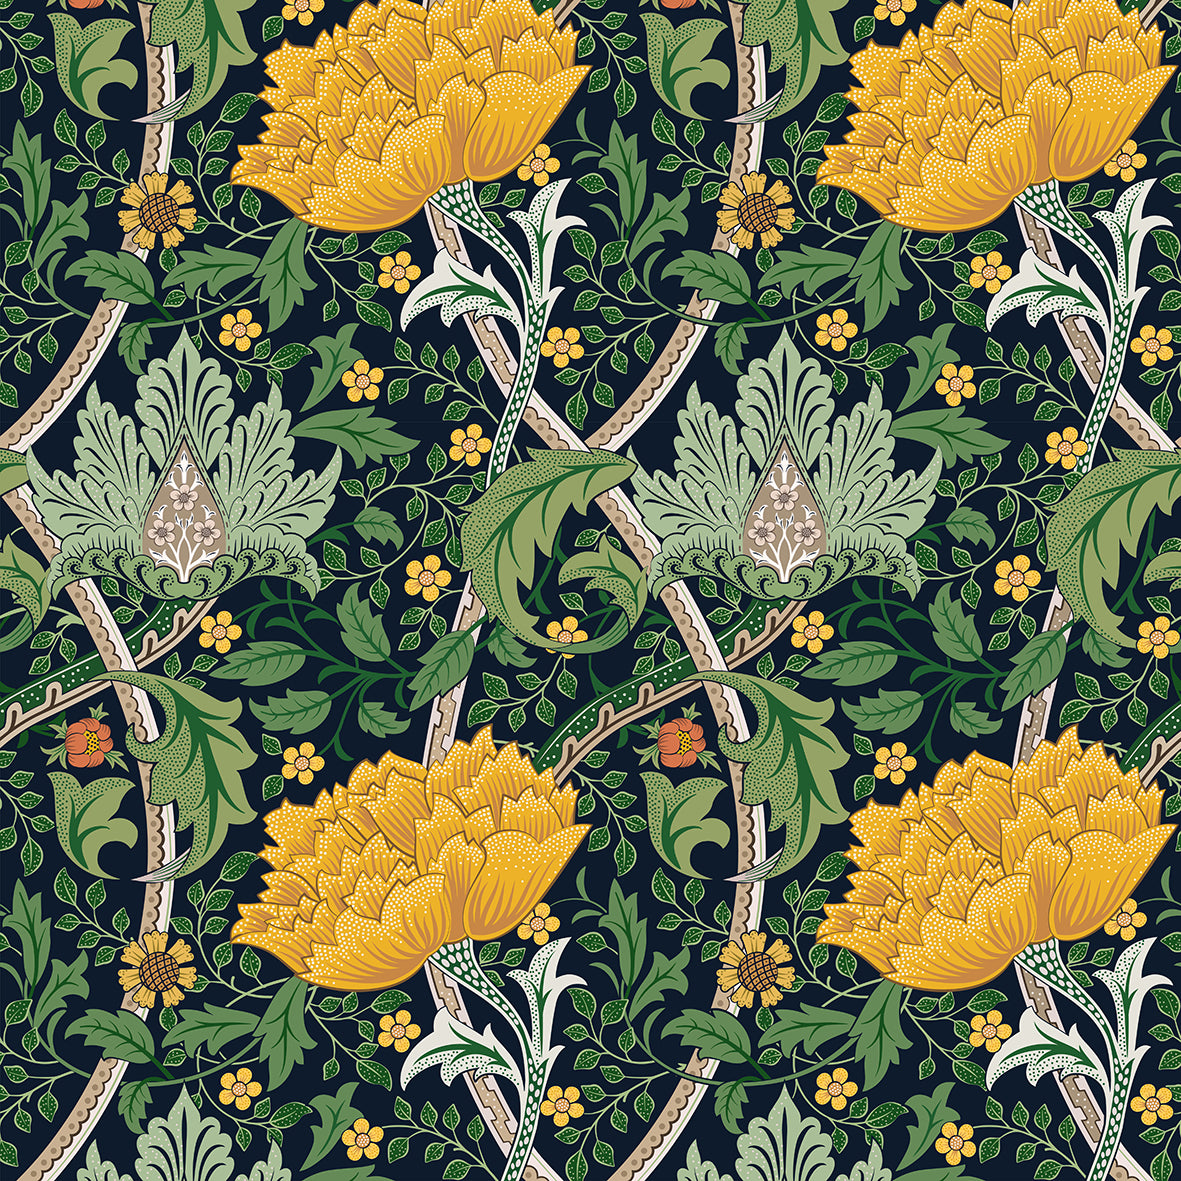 william-morris-co-shower-curtain-chrysanthemum-collection-yellow-3